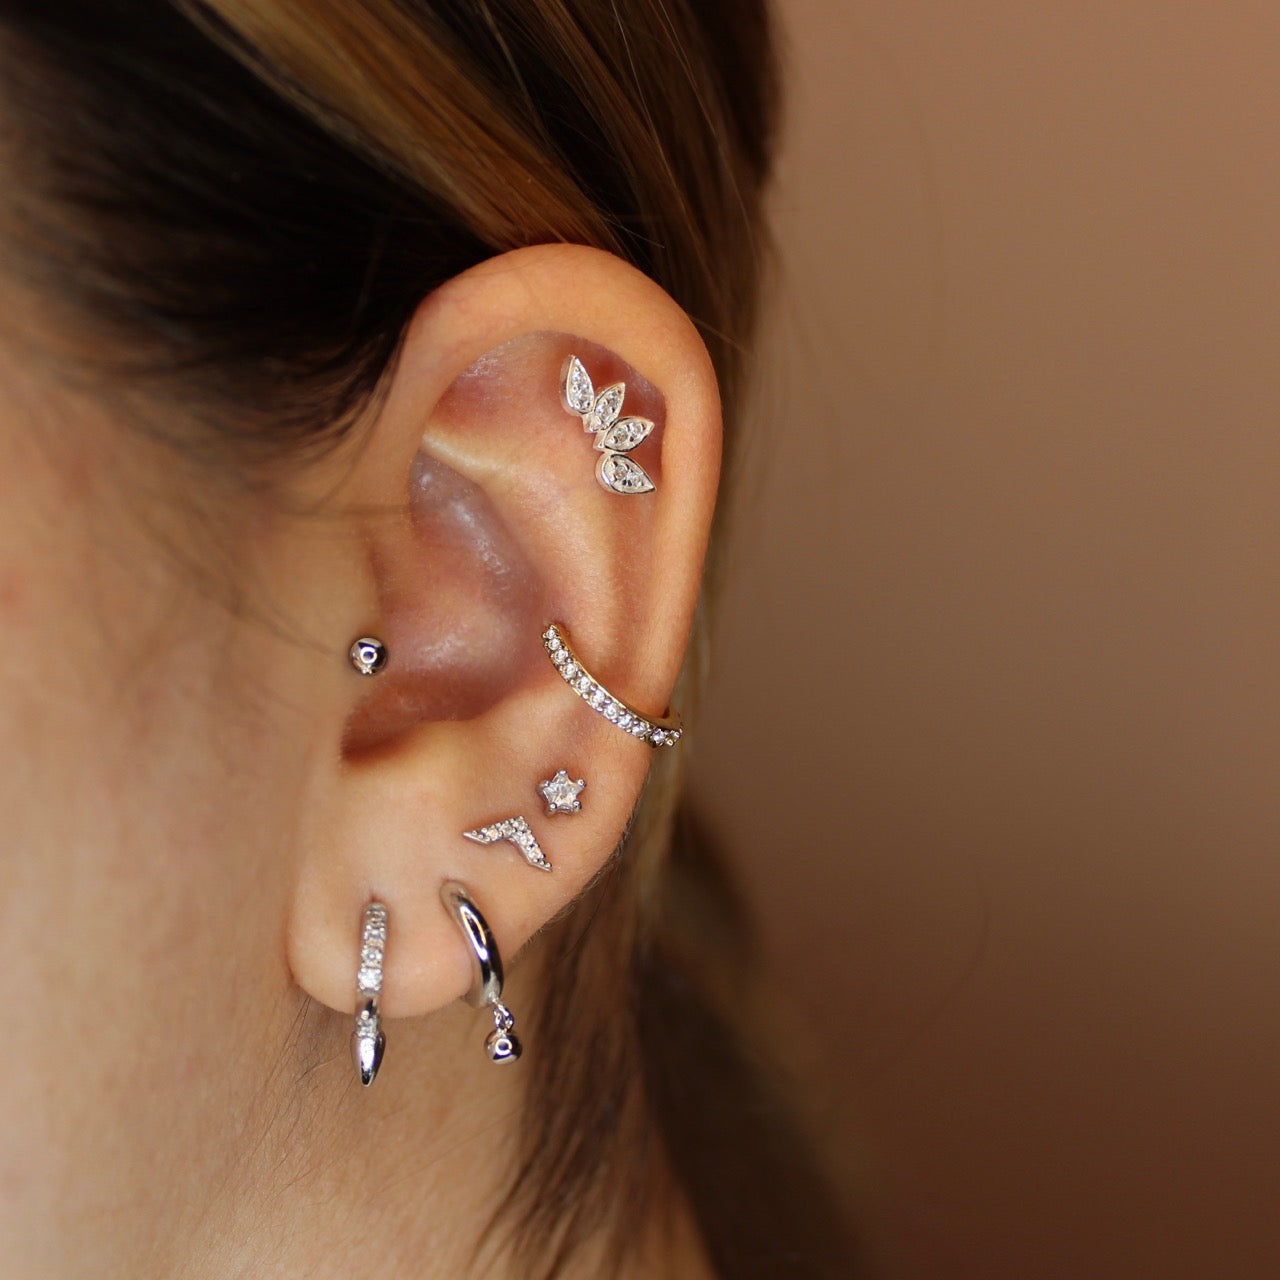 The Contraconch aka Outer Conch Piercing Is Rising in Popularity | Allure